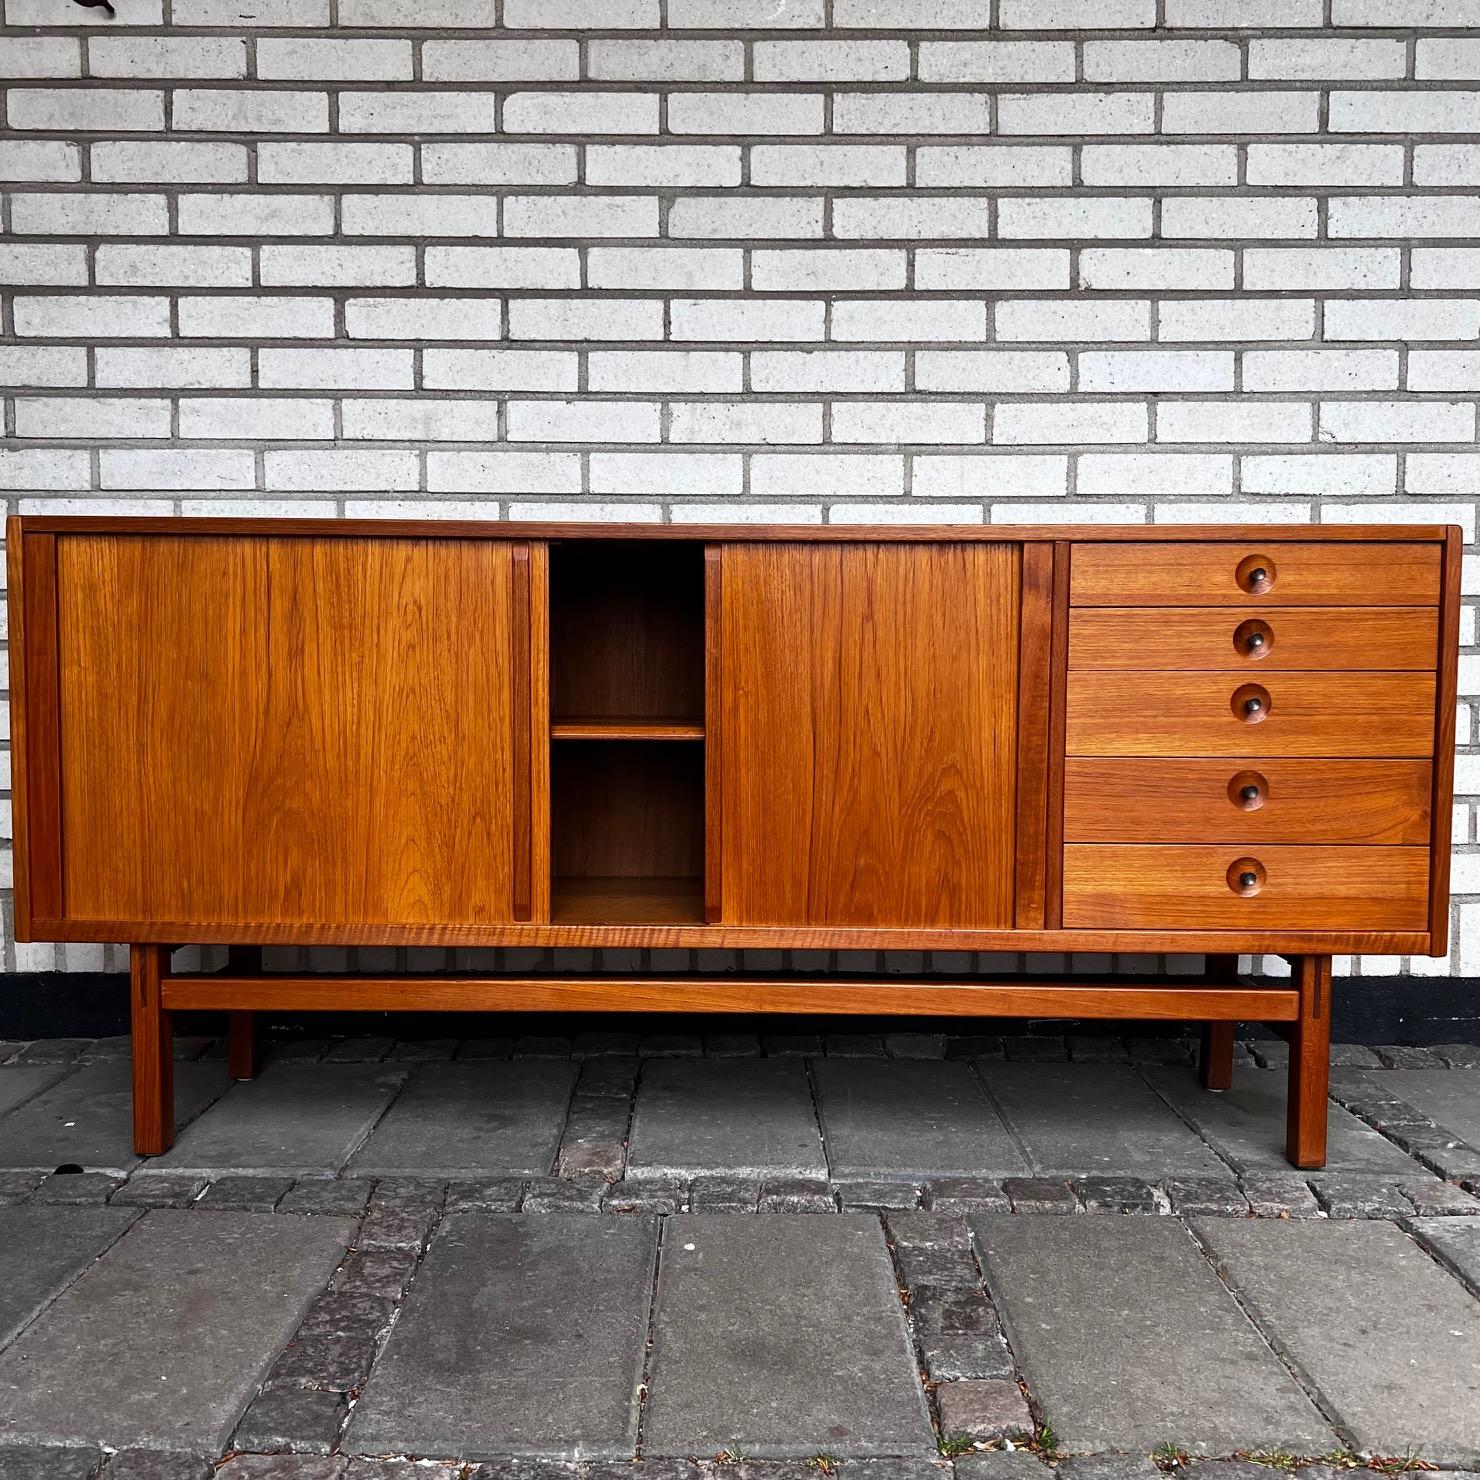 This sideboard 